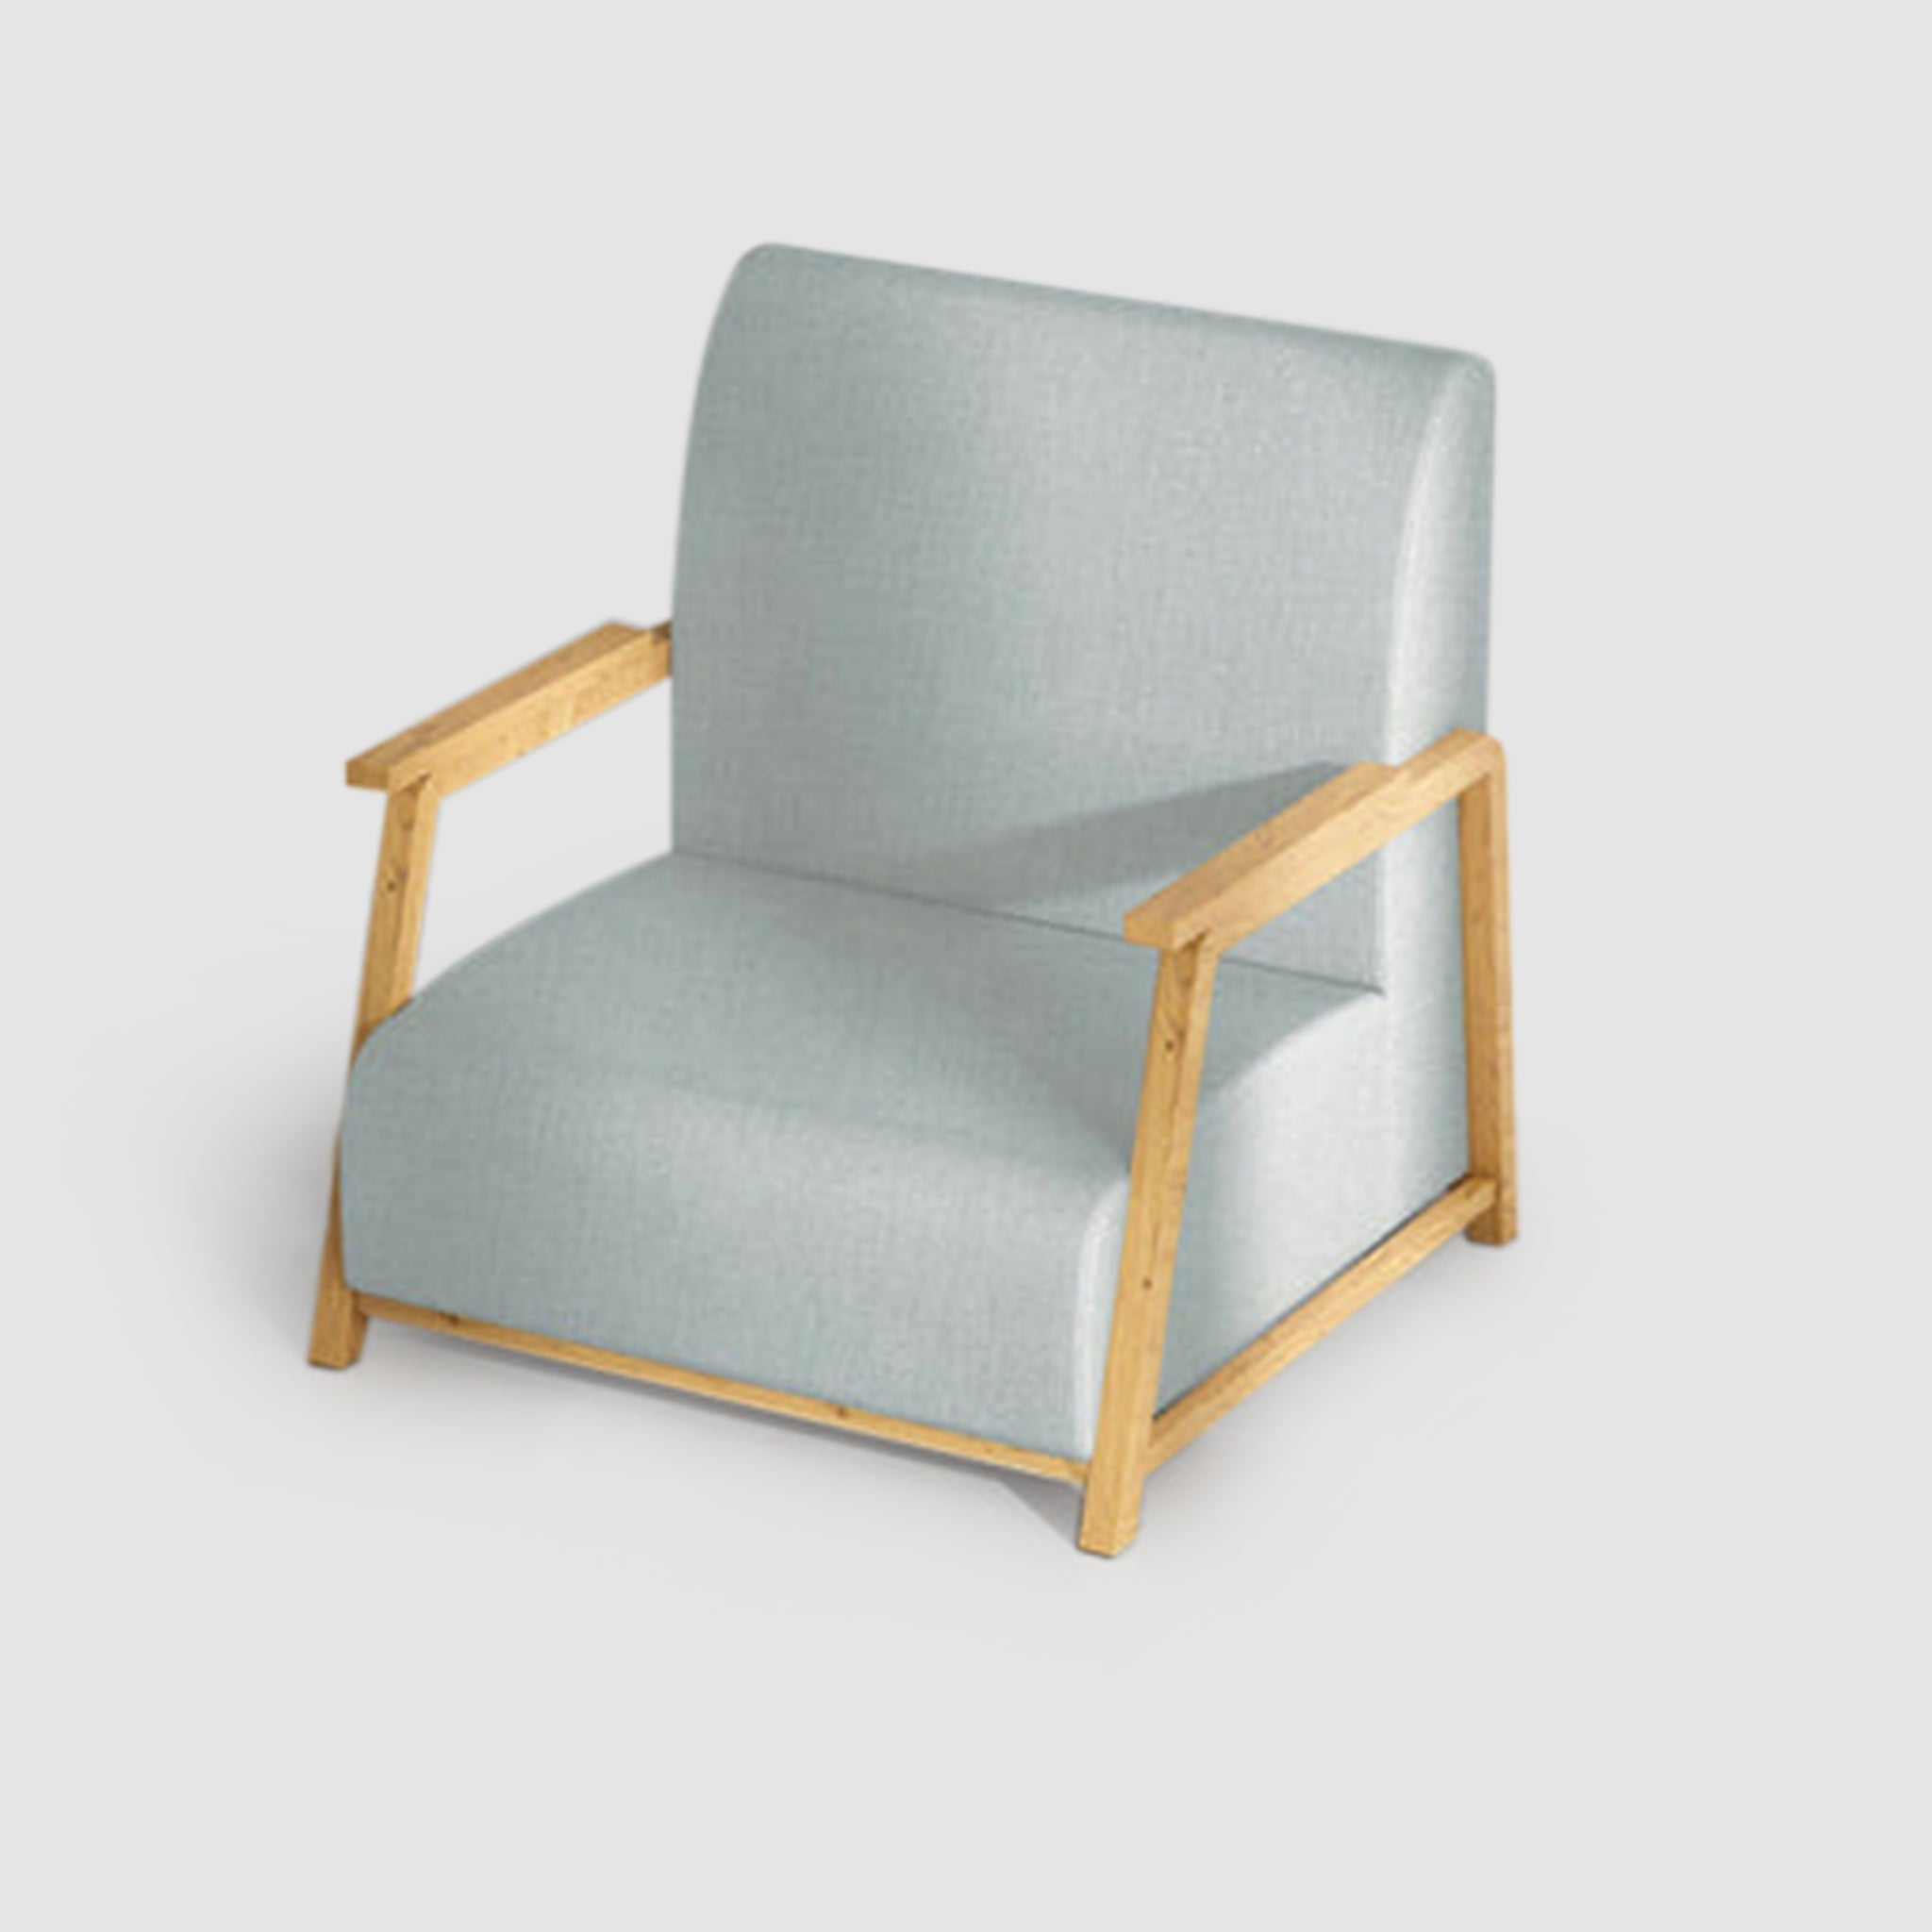 Angled view of The Dixon Arm Accent Chair showcasing its modern design with light blue upholstery and natural wooden armrests.